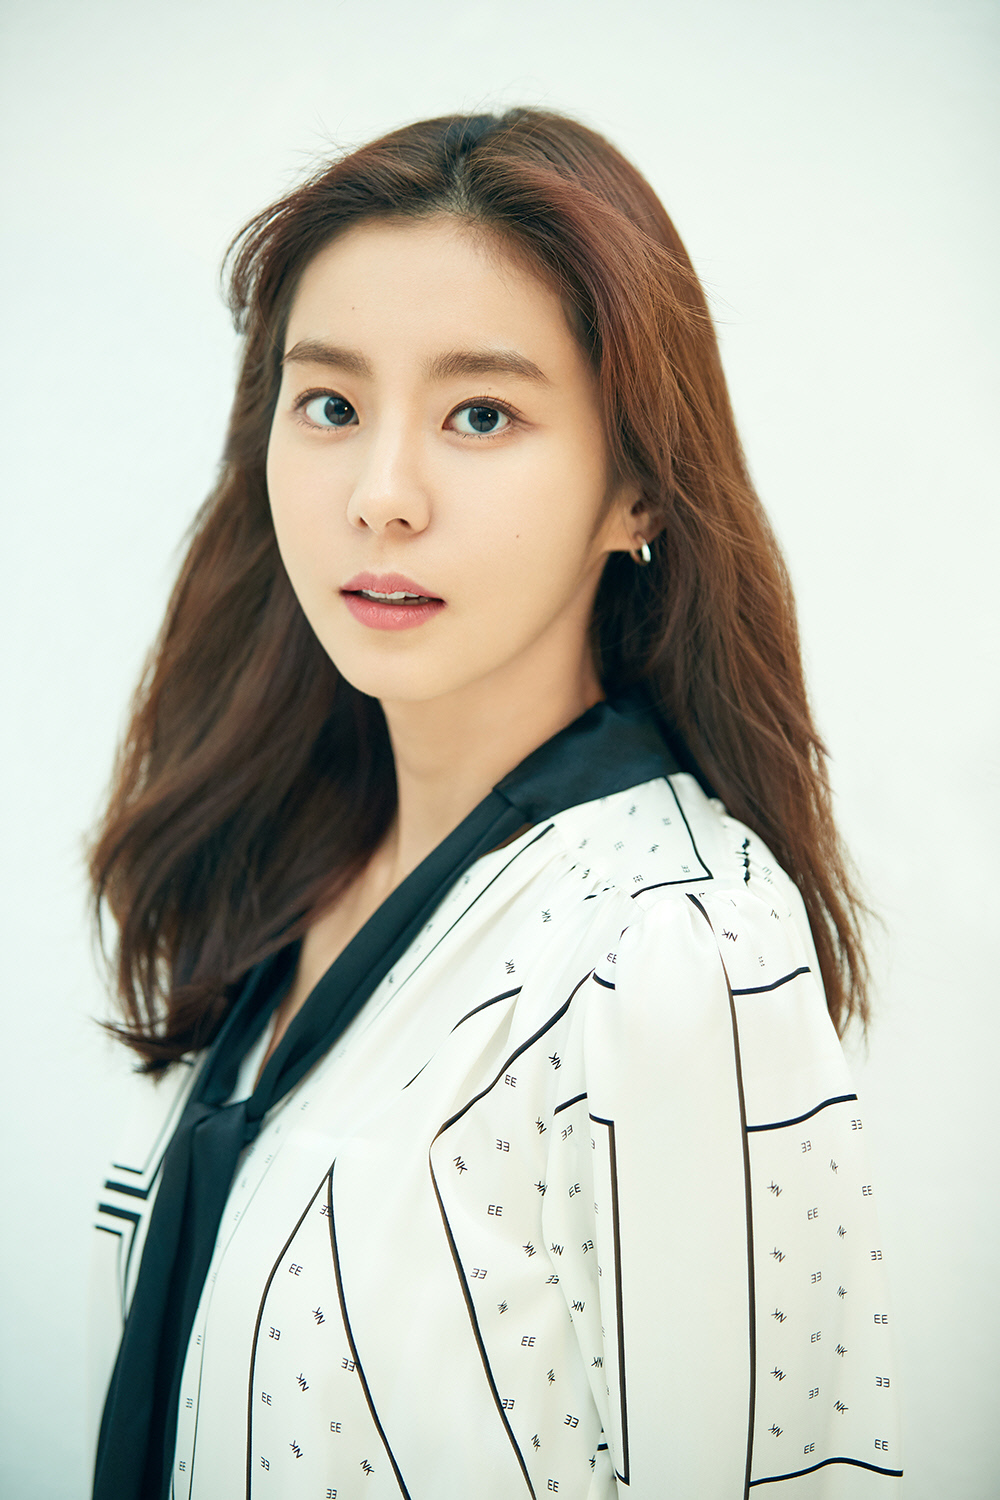 Actor Uee confirmed her appearance as the heroine of the SF8 (SF8) series Kenneth Tsang Kong Pod.SF8, which is produced by Sufilm in cooperation with MBC, the Korean Film Directors Association (DGK), and wave, is a story of humans dreaming of a complete society through technological development in the near future. It is a Korean version of the OLizynal SF Anthology series.Uee will co-work with Choi Siwon as the heroine Support for the Kenneth Tsang Podge directed by Oh Ki-hwan, the movie The Jung Suk of Work.Kenneth Tsang Kong Pod is a romantic comedy that depicts the process of men and women who meet through VR (virtual reality) making love even in real life.Uee received a favorable reception with the Best Actress Award in the feature drama category of 2018 KBS Acting Awards, receiving the hot love of viewers through KBS2 One Only My Kim Doran, which was popular last March.Recently, the channel A entertainment show Lets Ride on the Airplane 2, which contains the crew challenger, has captivated viewers with its frank character and charm of the beauty of the eight-way beauty.Uee, who has been receiving a good response with her acting ability and beauty, is expected to attract viewers with what charm she will have in the fresh romantic comedy Kenneth Tsang Podge, which is a virtual reality.Meanwhile, SF8 will be released on wave in July, and two OLizynal versions will be broadcast on MBC in August next month for four weeks.